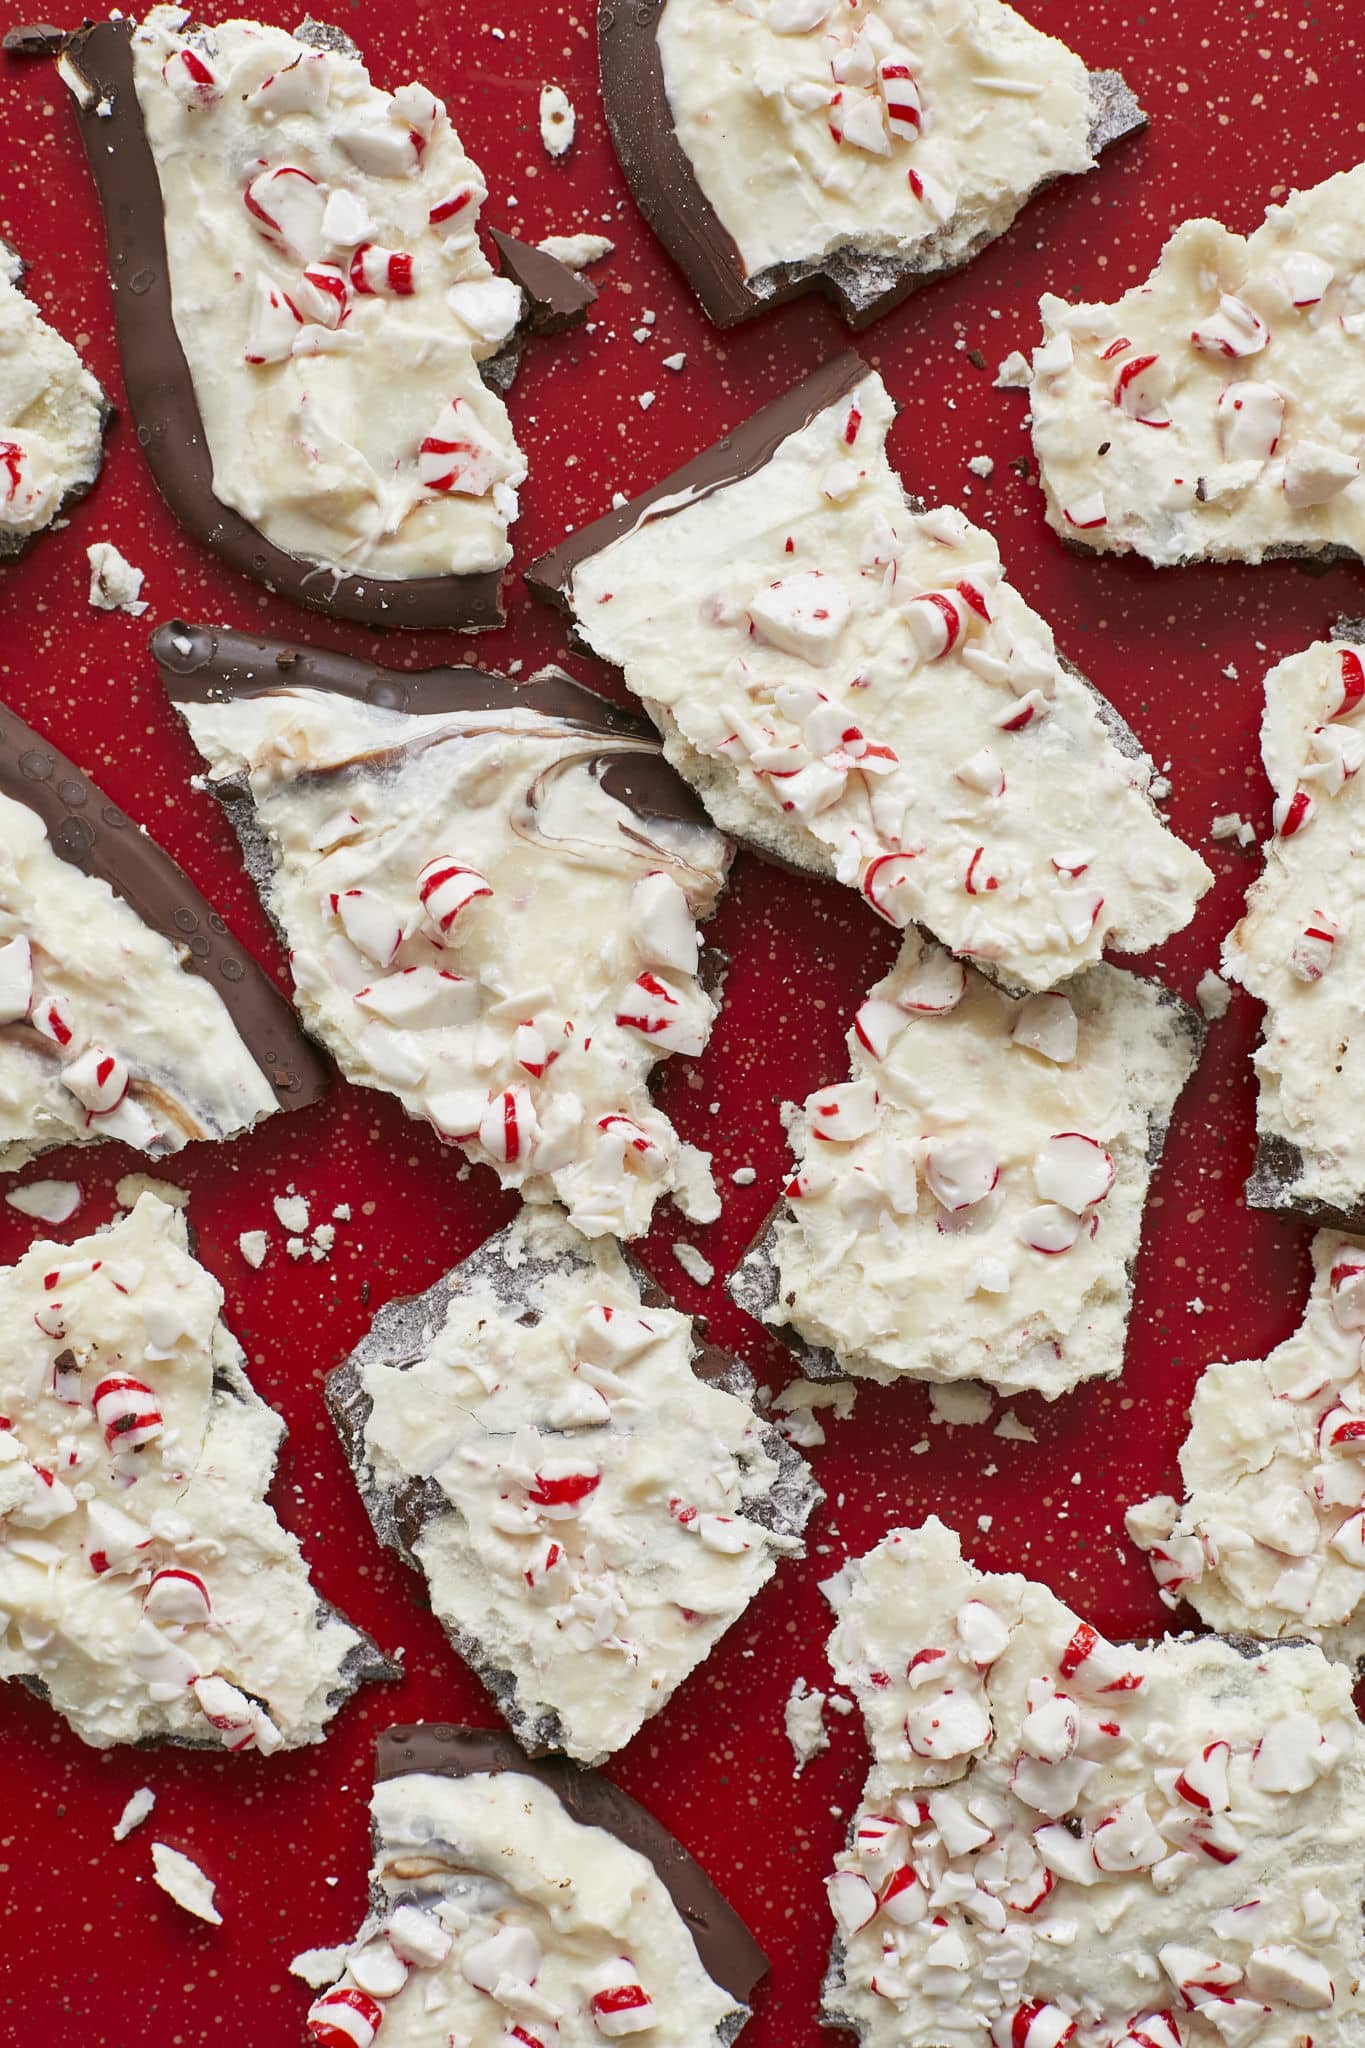 Homemade Peppermint Bark, broken up into pieces, are served on a red table. The bark has layers of dark chocolate and white chocolate and is topped with crushed candy canes.